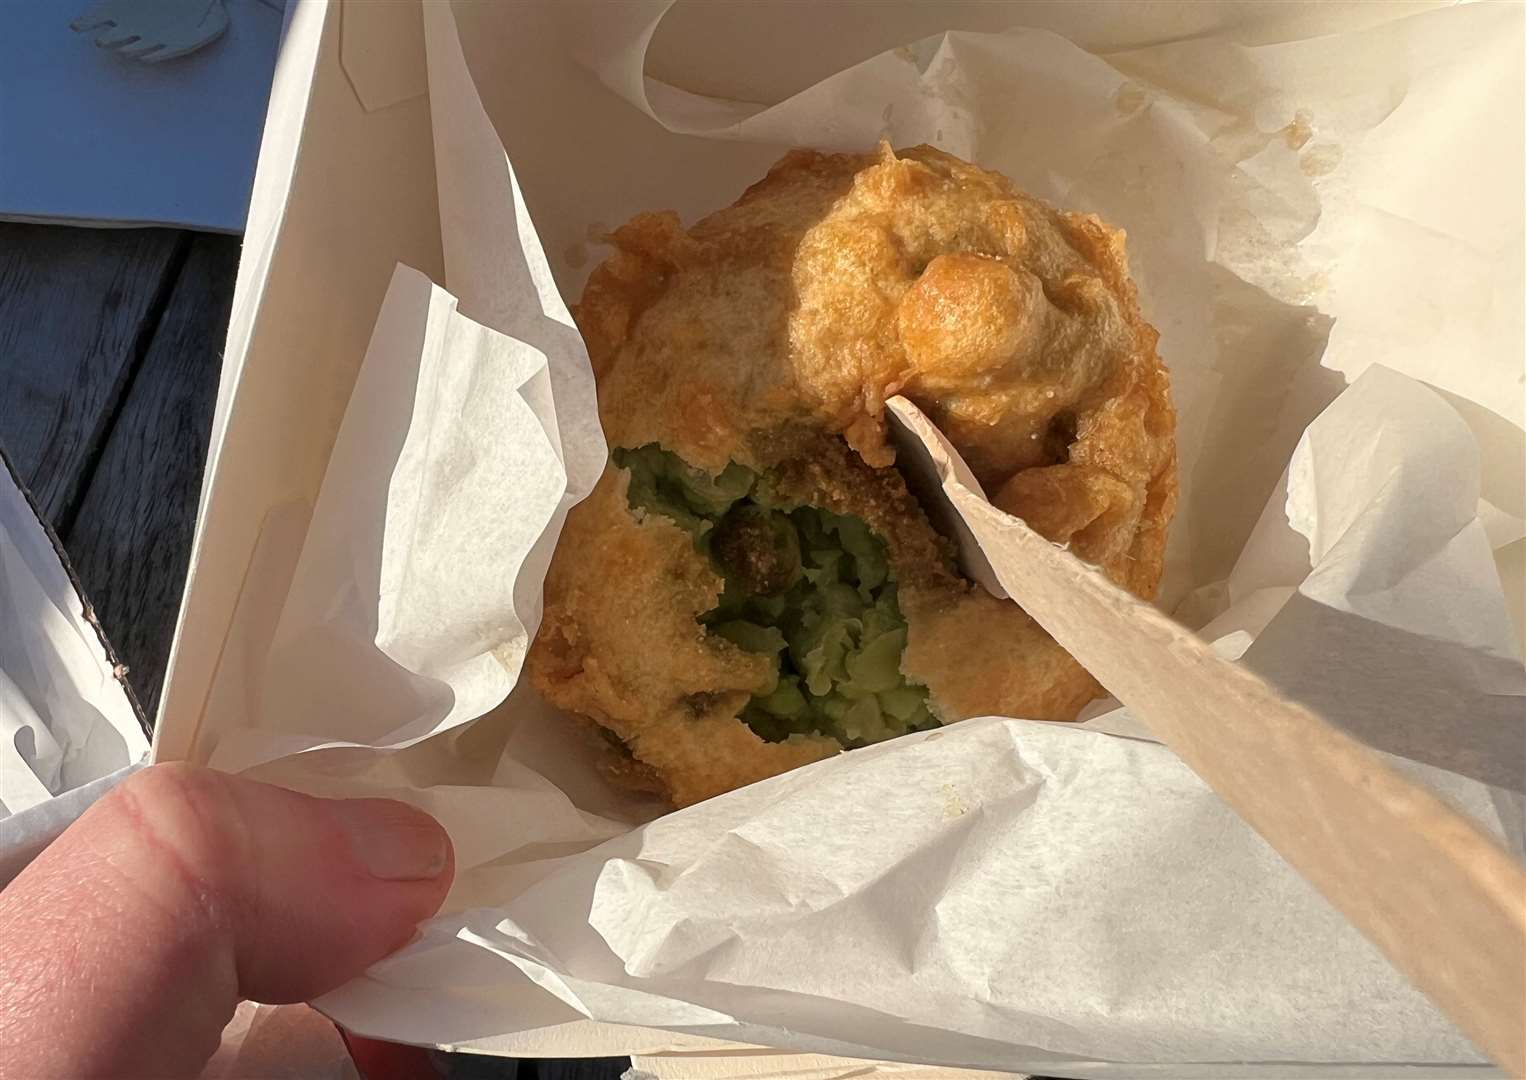 The pea fritter - an odd, yet strangely tasty little thing